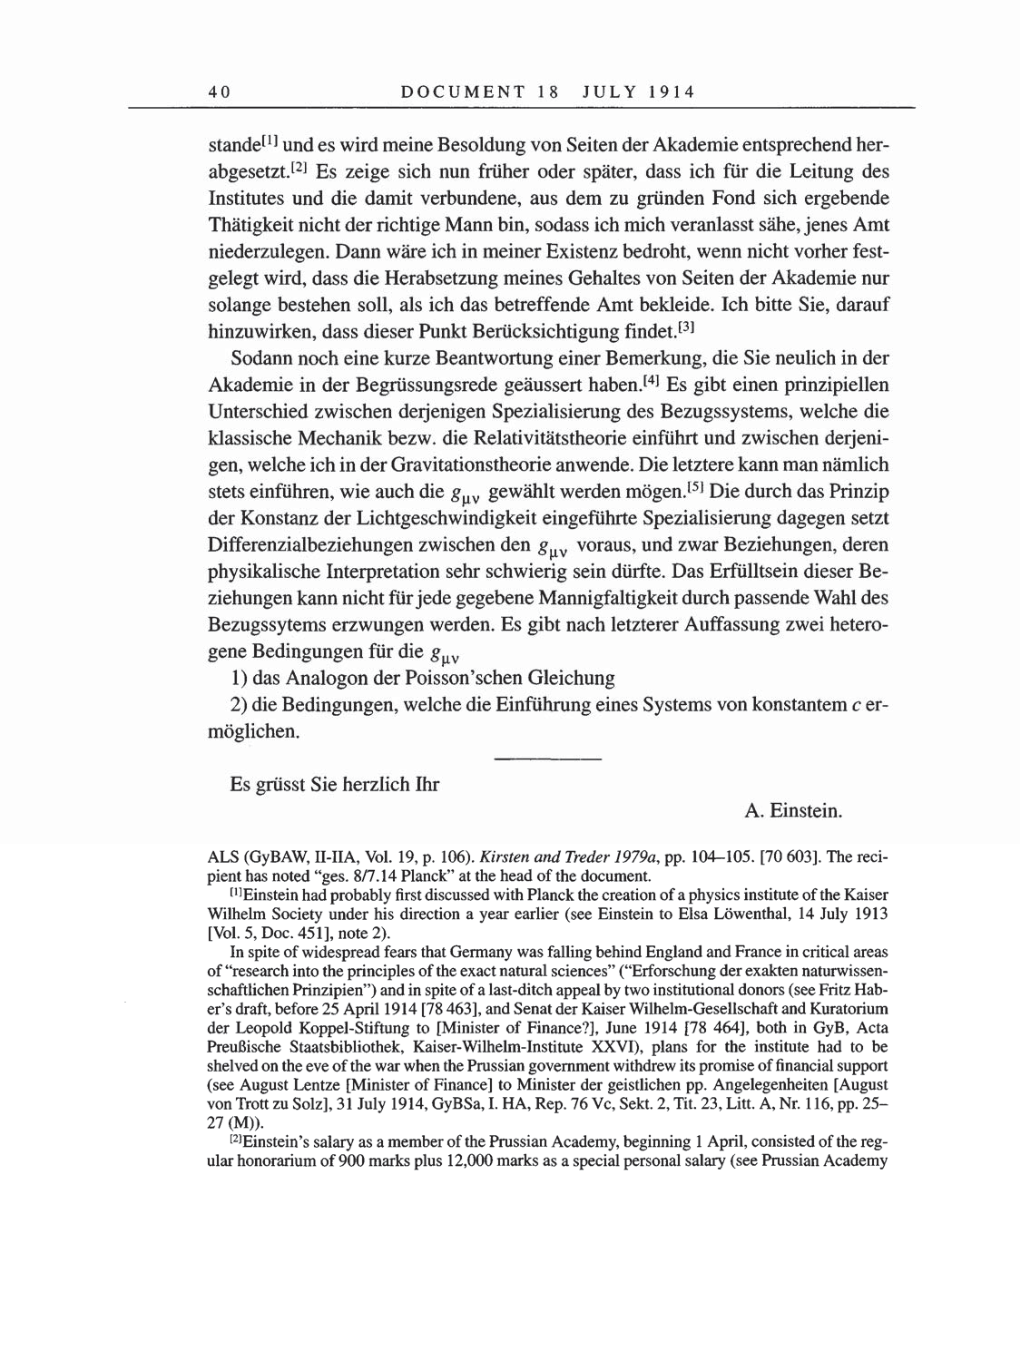 Volume 8, Part A: The Berlin Years: Correspondence 1914-1917 page 40